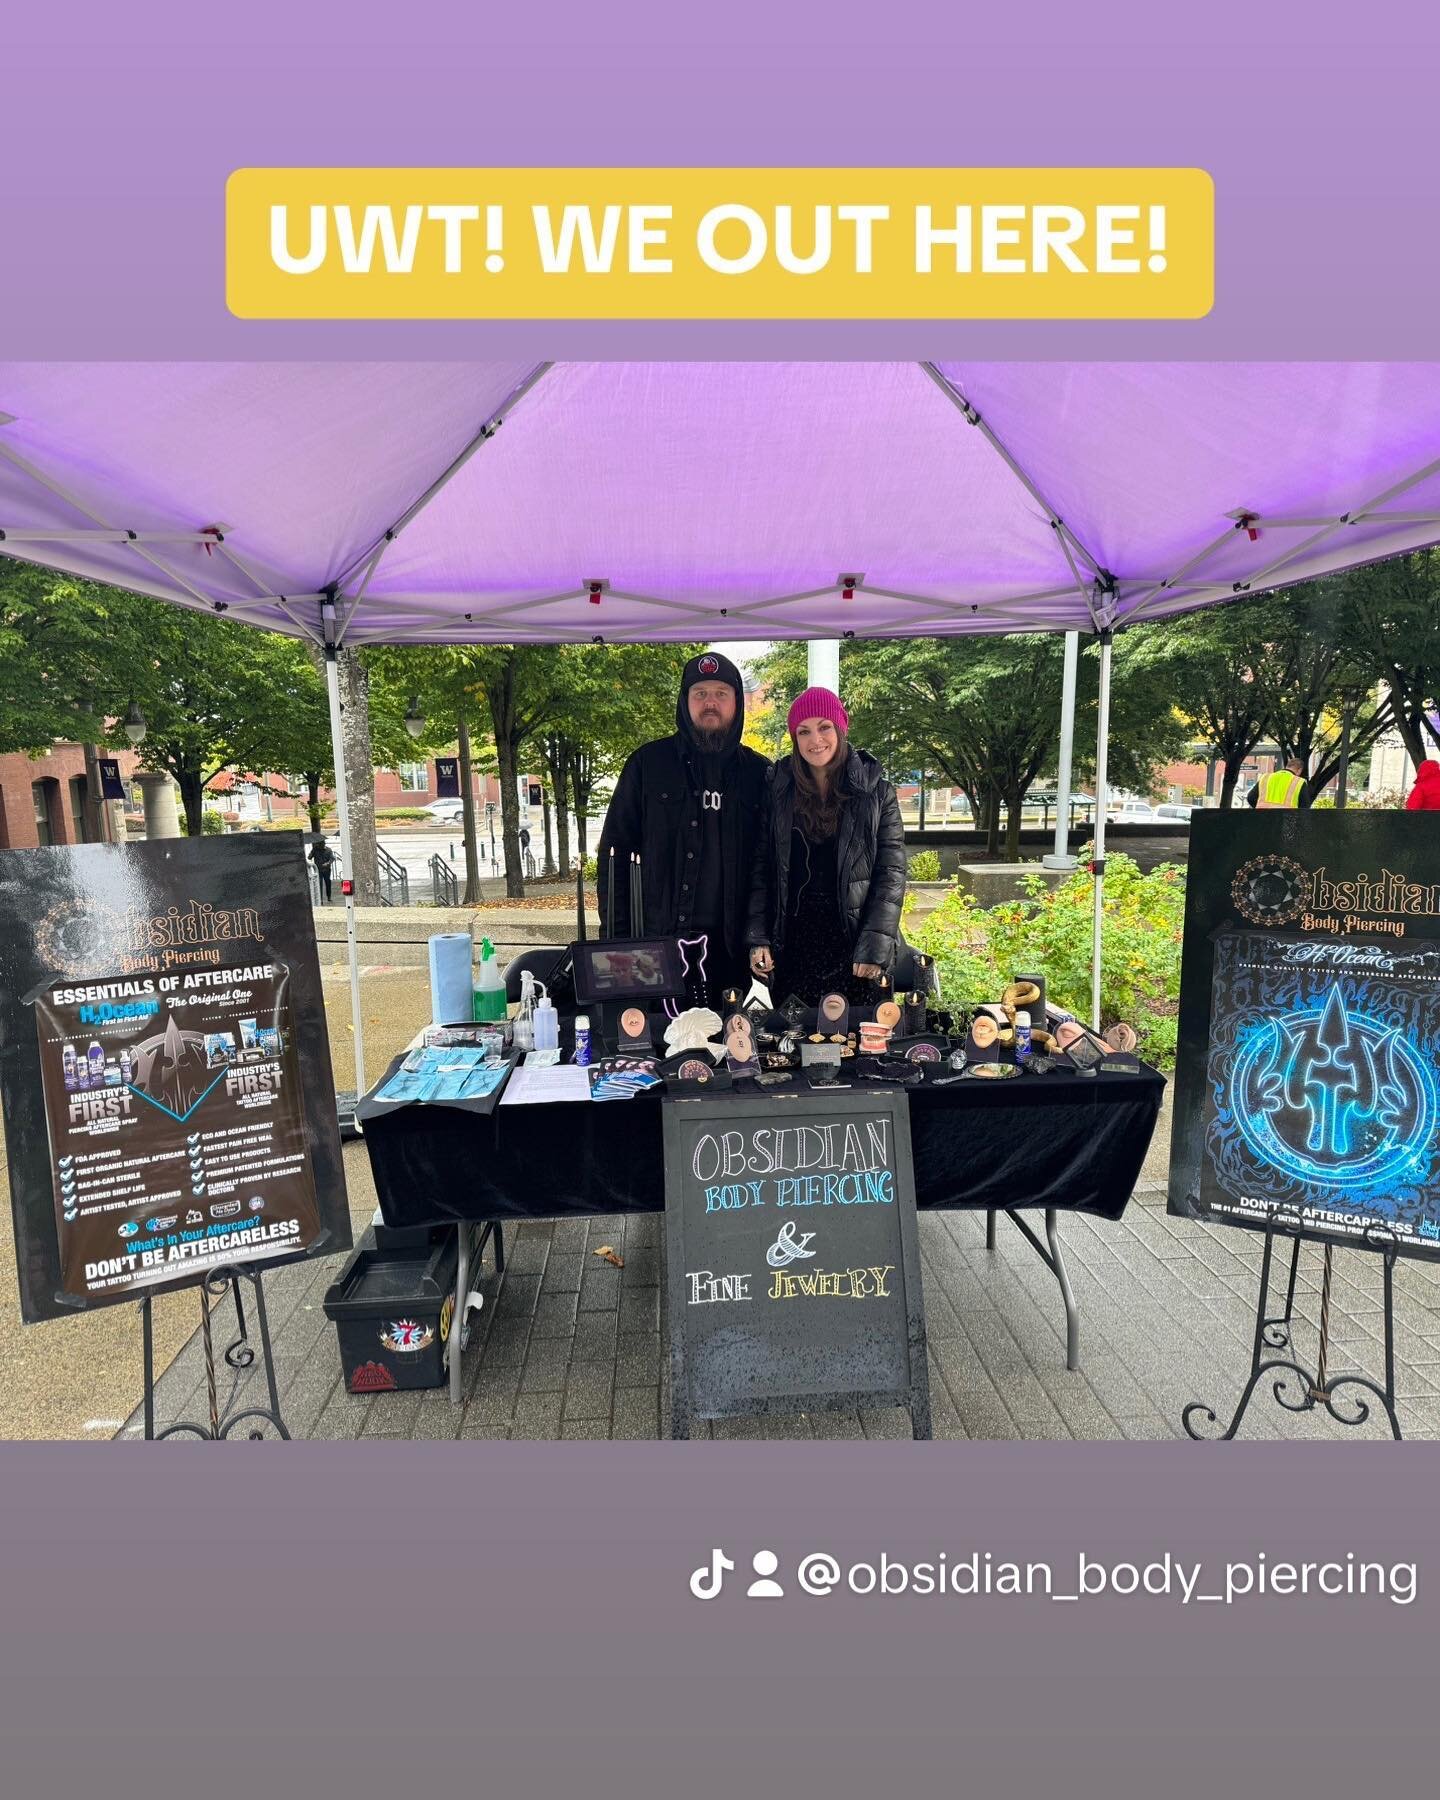 WE OUT HERE!!! @University of Washington TACOMA!!! Come swing by for some info during Husky Hour! #ob#obsidianbodypiercing #bodypiercing #bodyjewelry #finejewelry #piercing #h2ocean #aftercare #piercingaftercare #toothgems #tacoma #piercecounty #uwt 